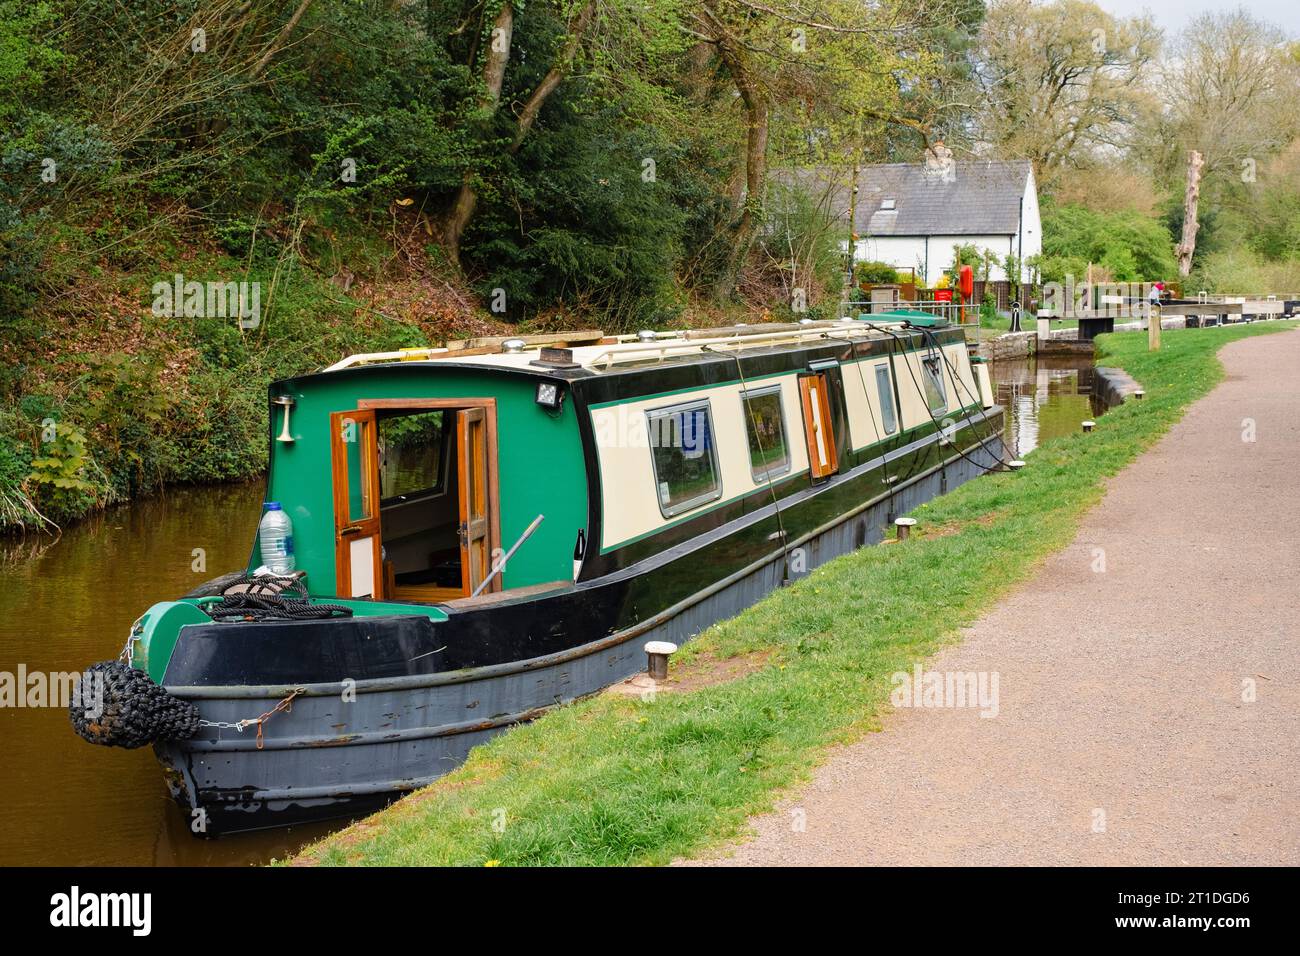 Canalboat moored at Brynich Lock on Monmouthshire and Brecon Canal in Brecon Beacons National Park. Brecon (Aberhonddu), Powys, Wales, UK, Britain Stock Photo